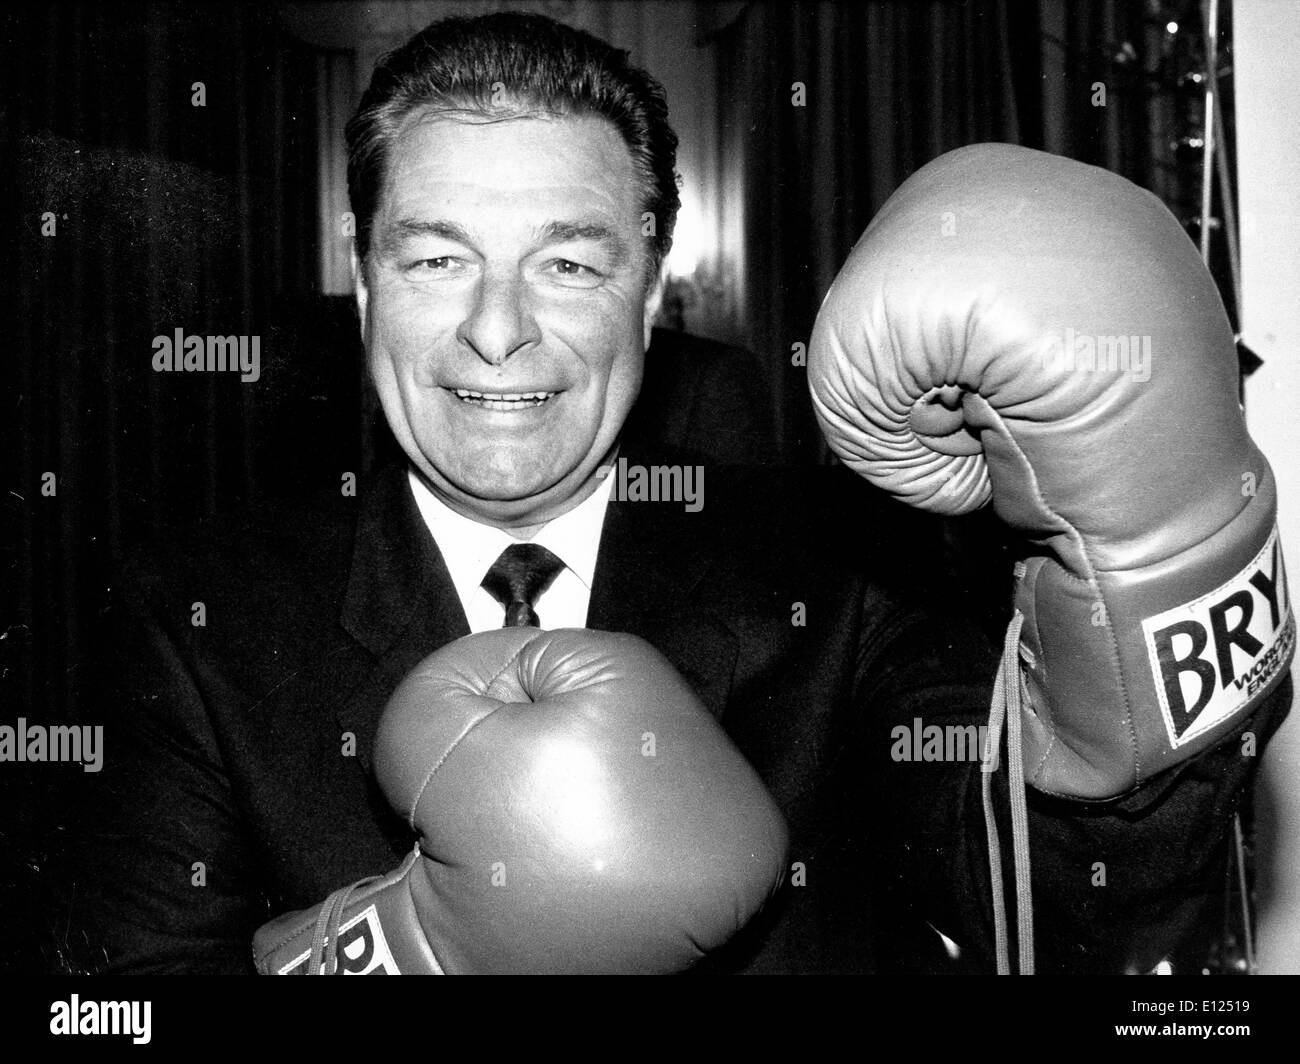 Dec. 18, 1986 - Zurich, Switzerland - JEAN-PASCAL DELAMURAZ poses with boxing gloves. Delamuraz was a Swiss politician and member of the Swiss Federal Council. Stock Photo